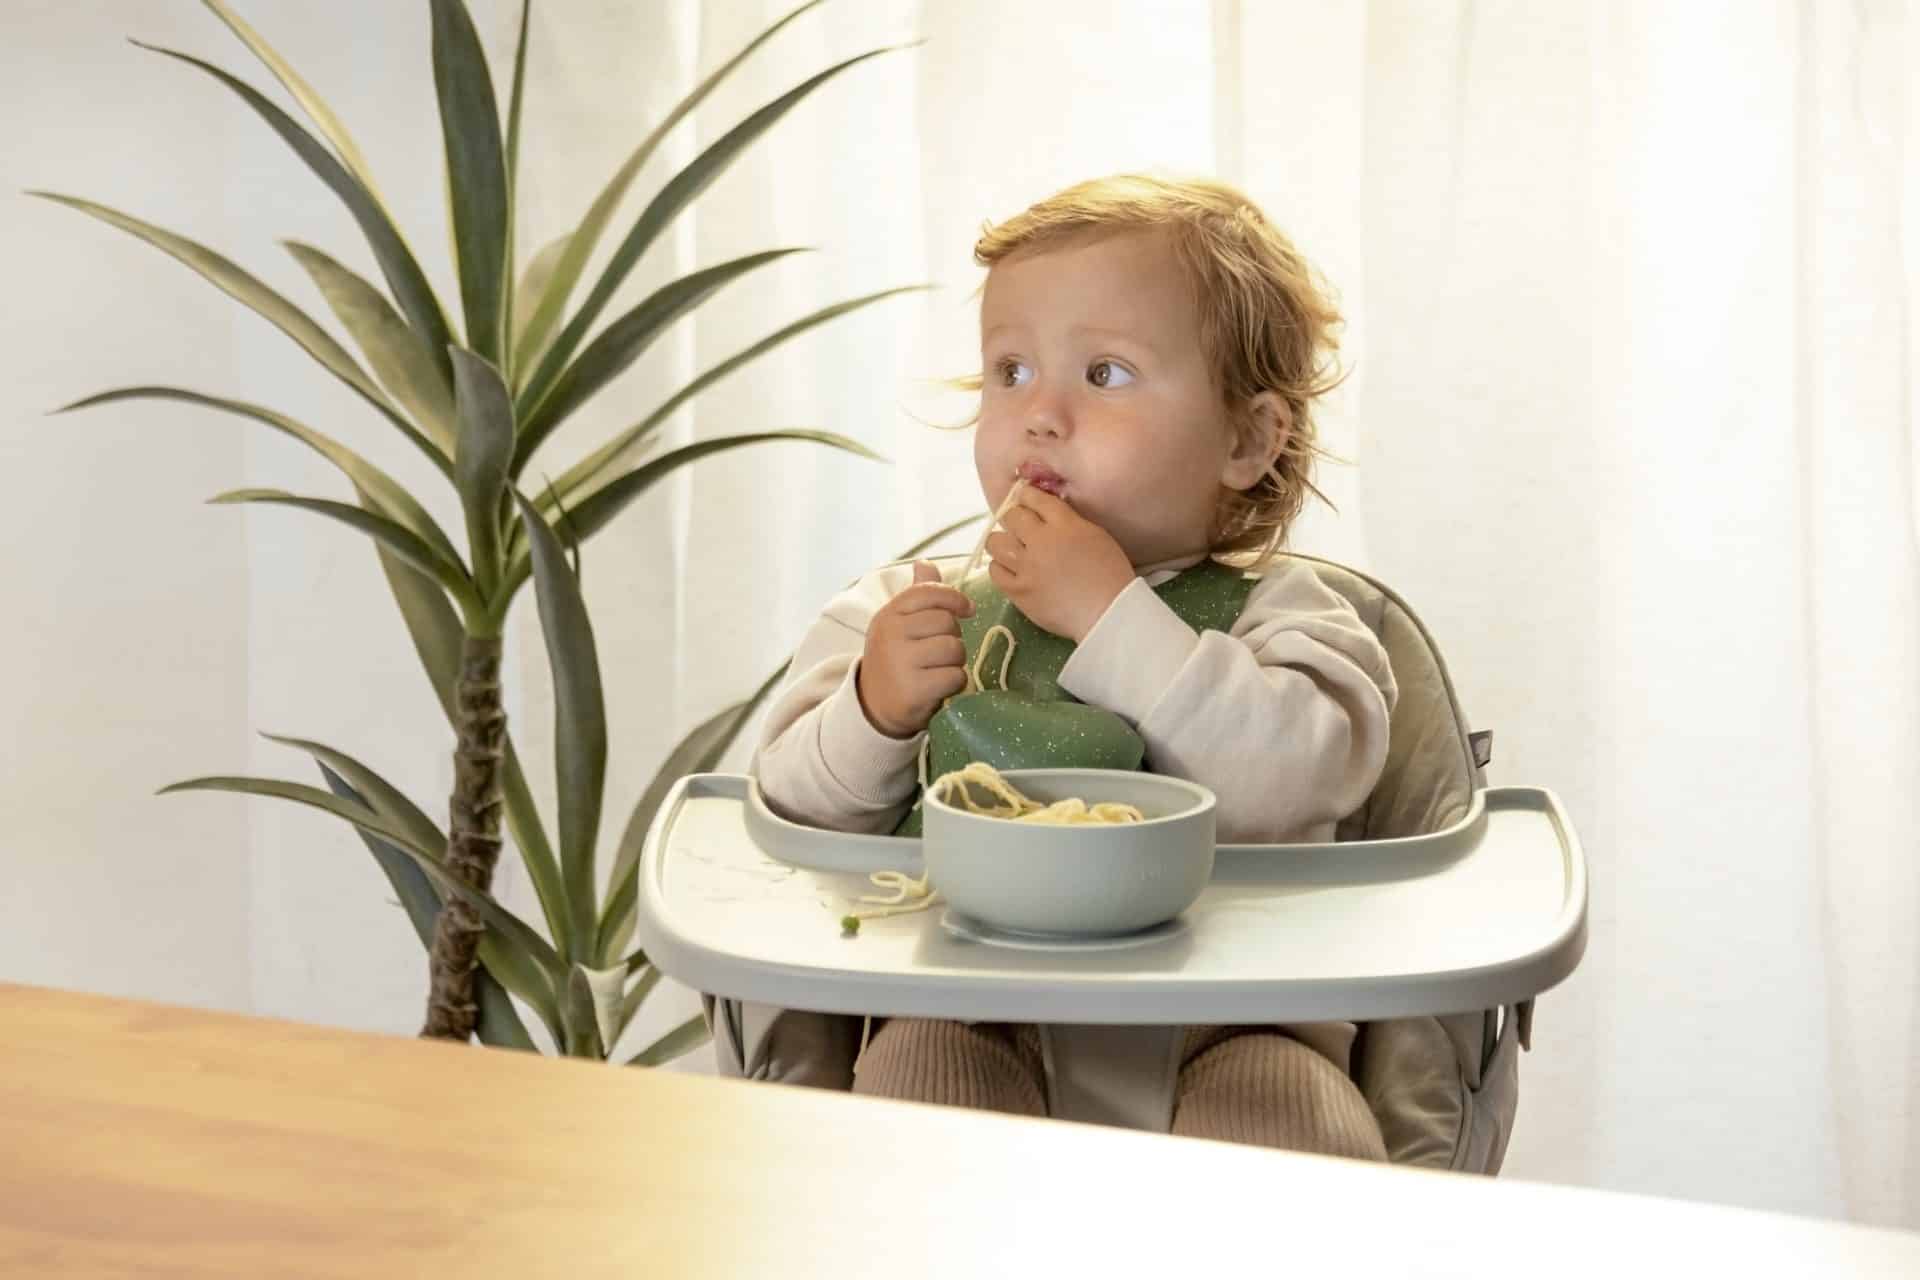 How to choose infant drool bibs and baby mealtime bibs